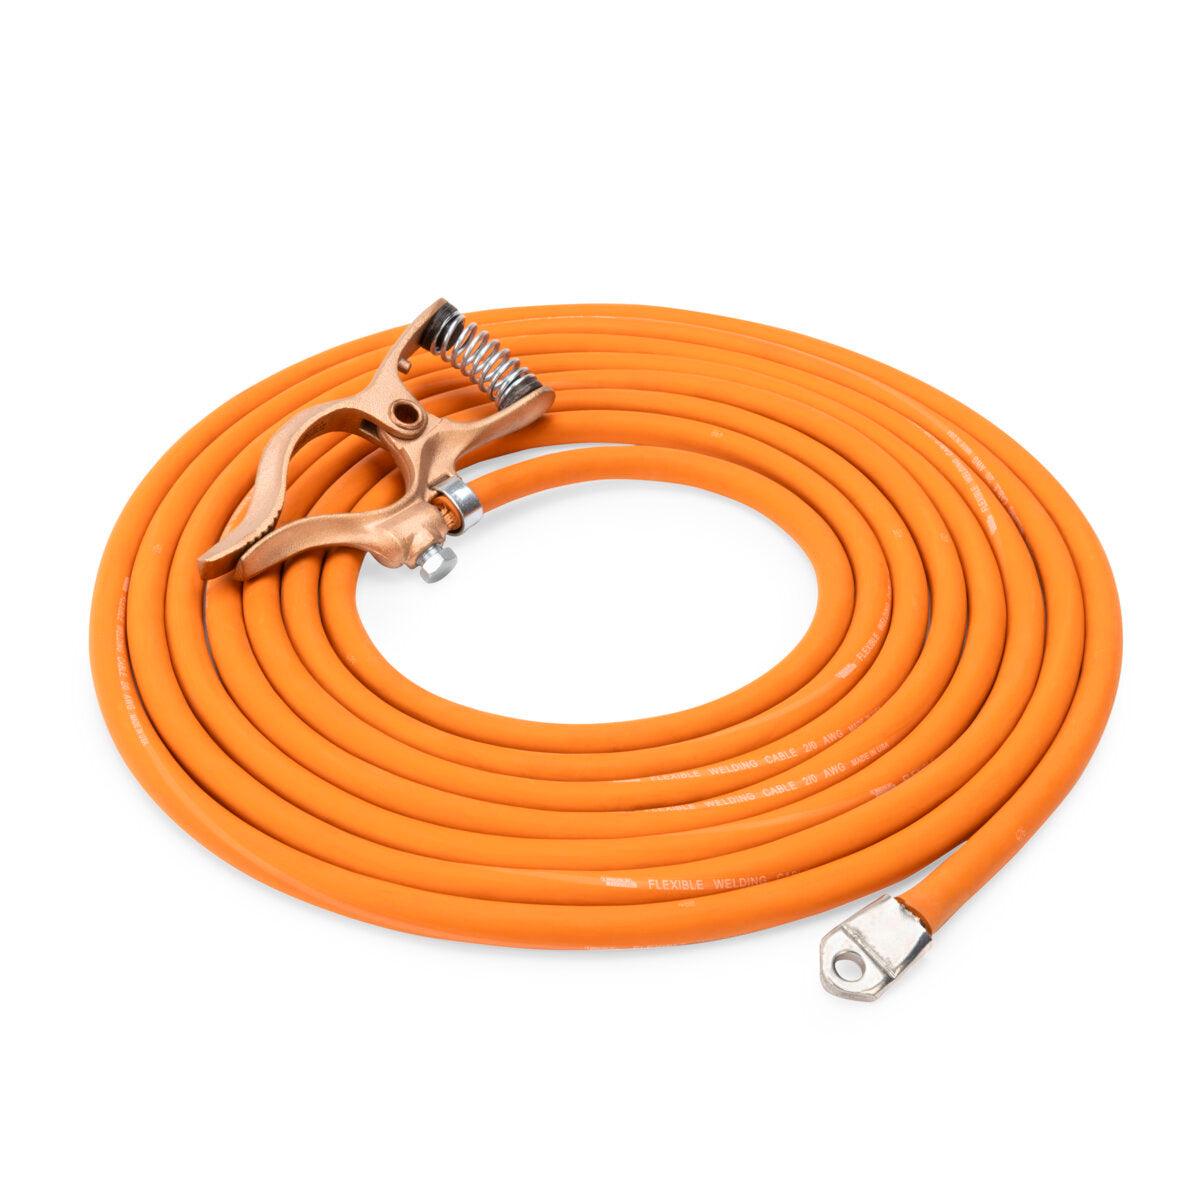 Lincoln Electric - Flexible Cable Work Lead - 2/0 with Ground Clamp & Lug - 25 FT - K5434-2/0-25 - WeldingMart.com